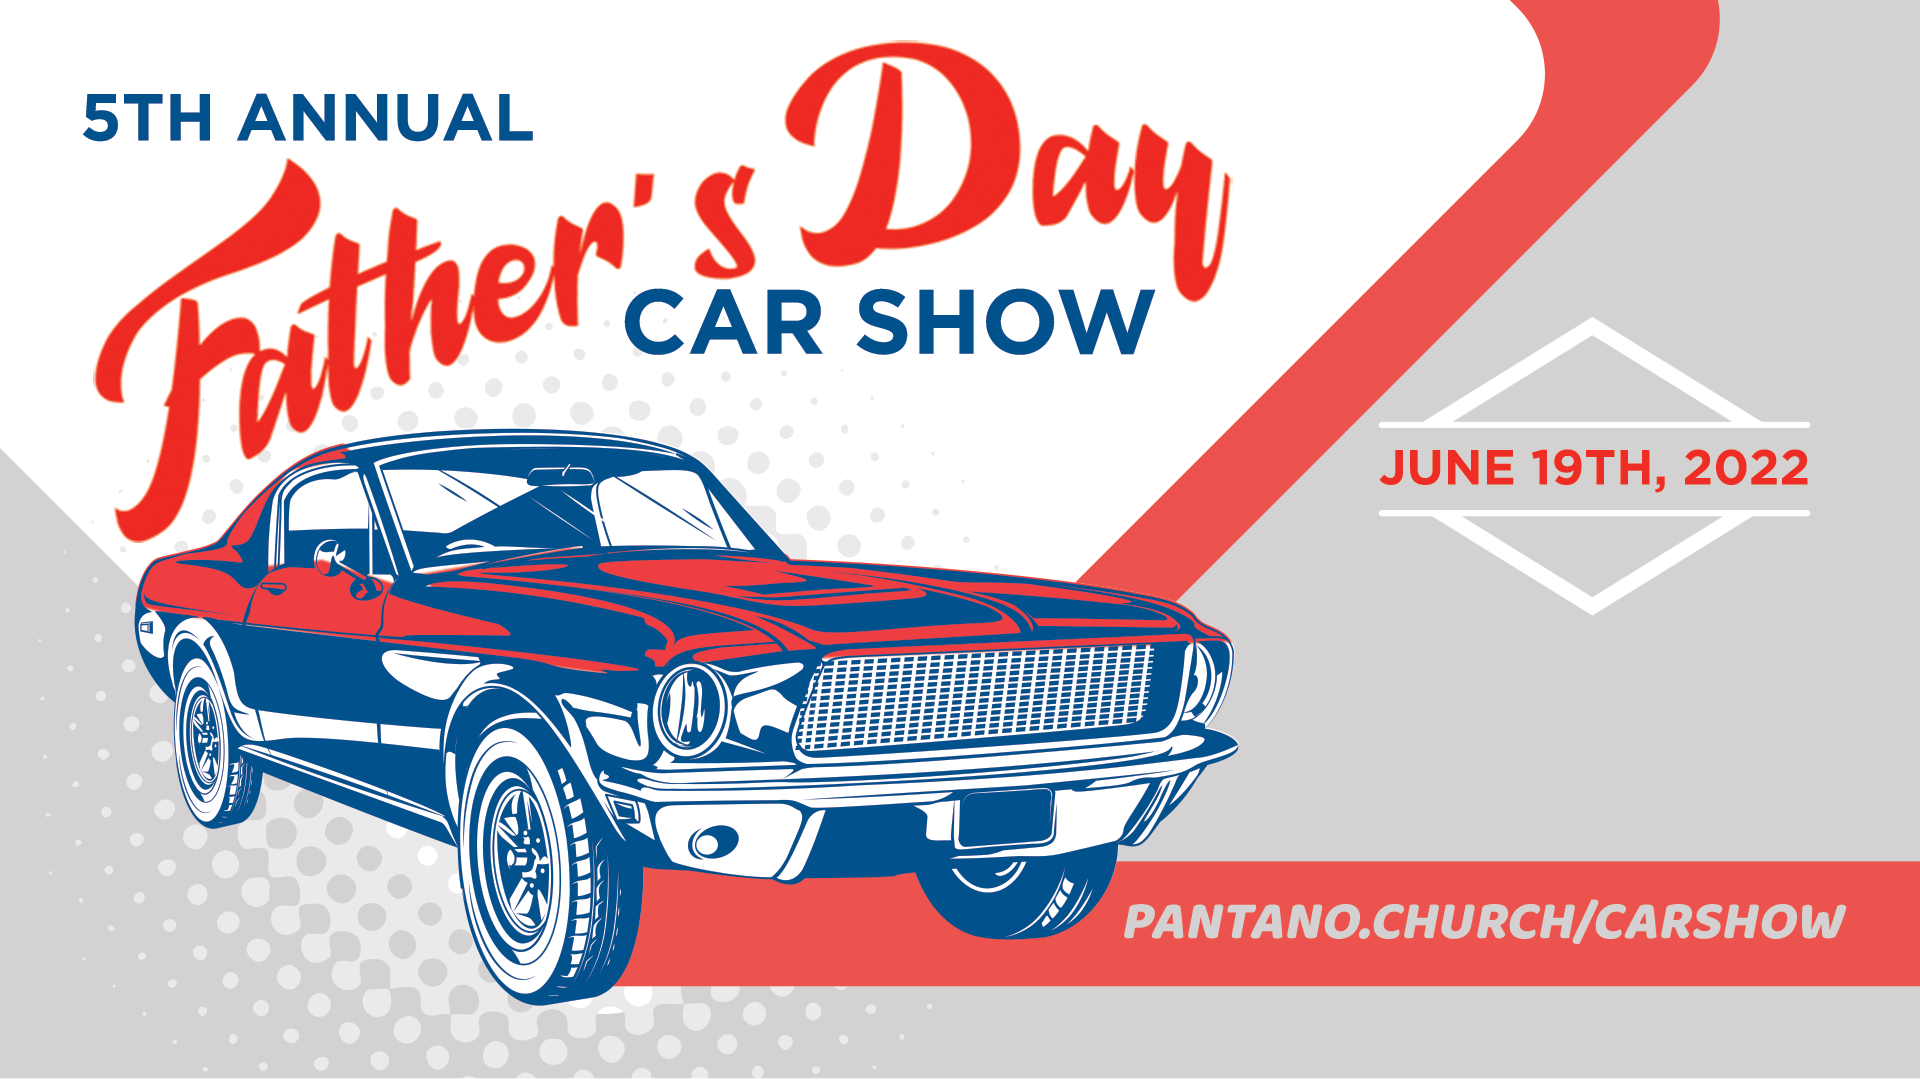 Image: 5th Annual Father’s Day Car Show 2022